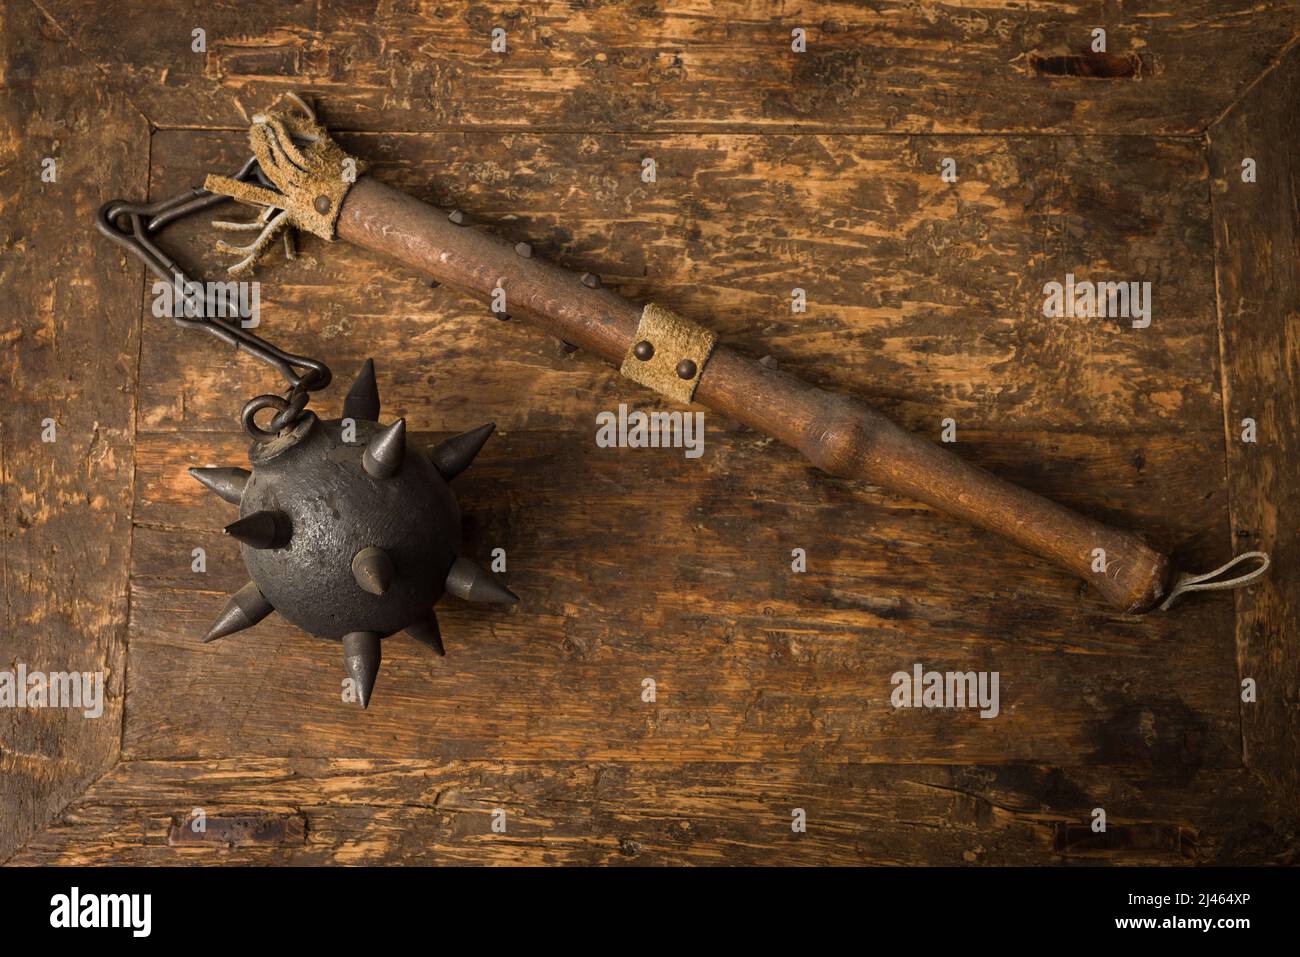 Rusty old battle mace as used by the common people in medieval war times Stock Photo